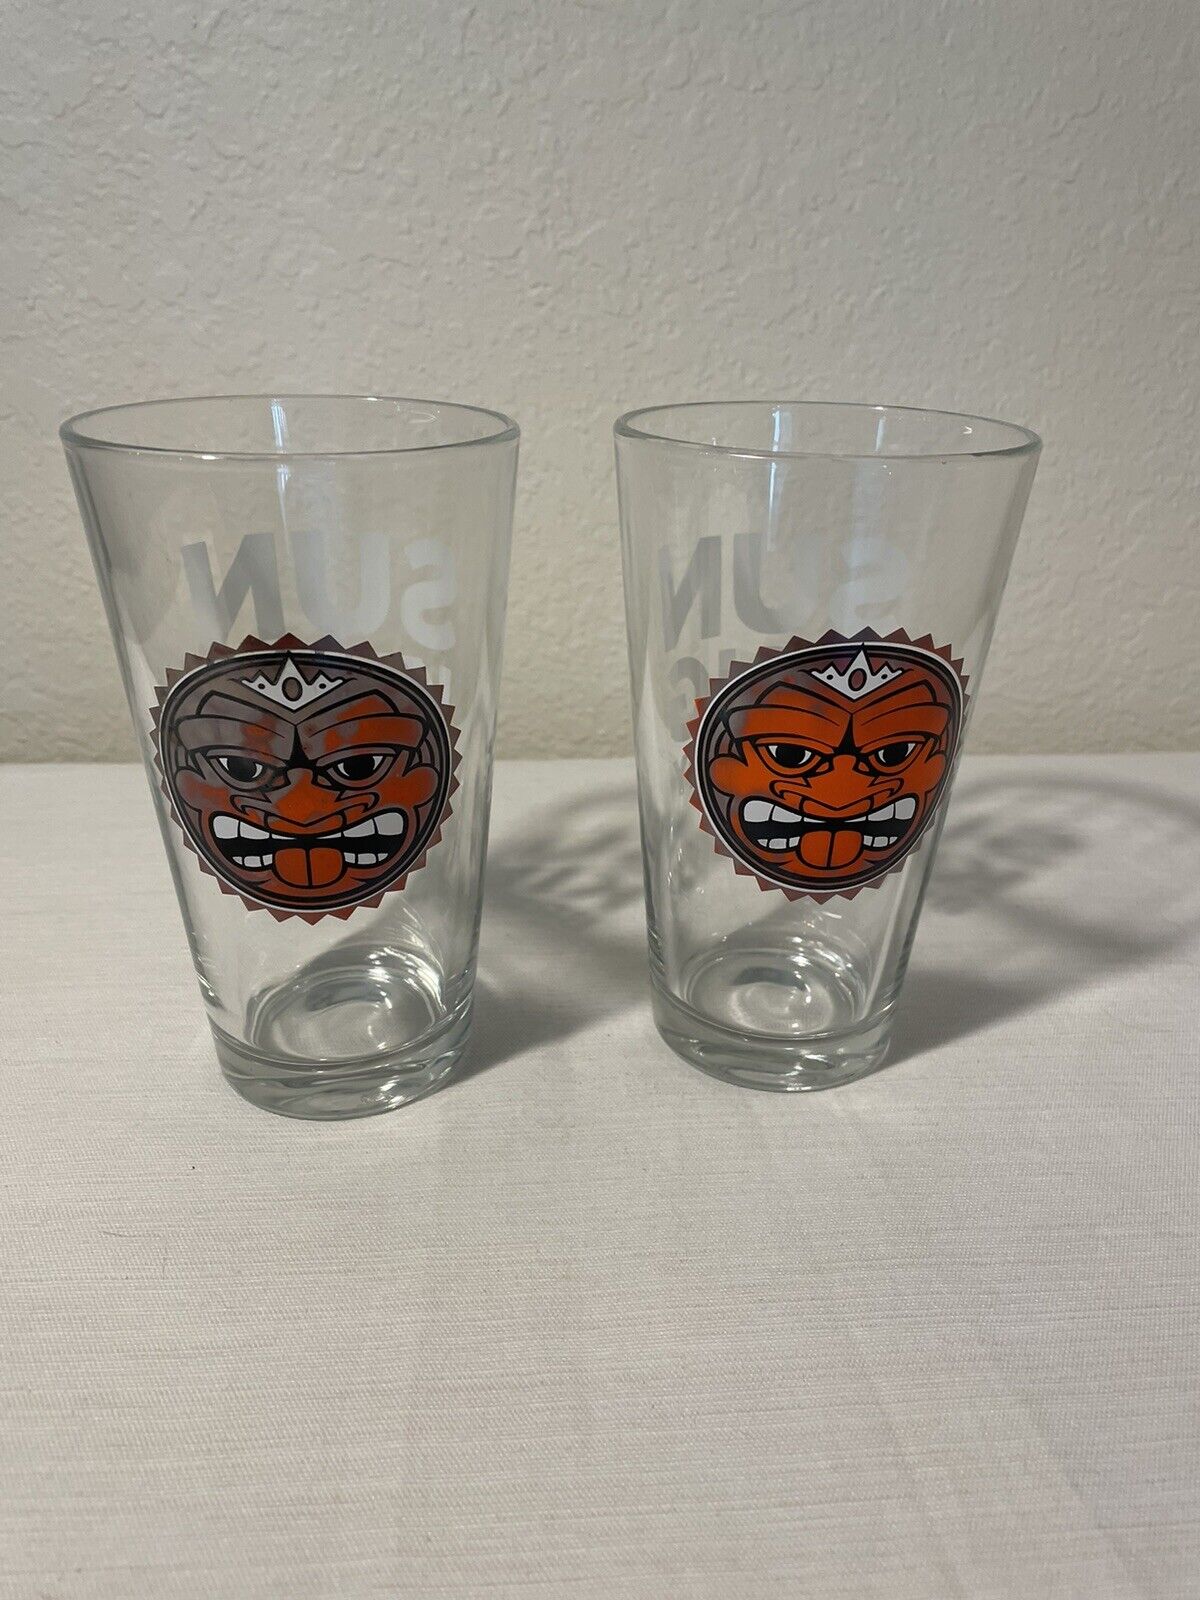 Sun King Brewery Tiki Faced Beer Glasses Set of 2